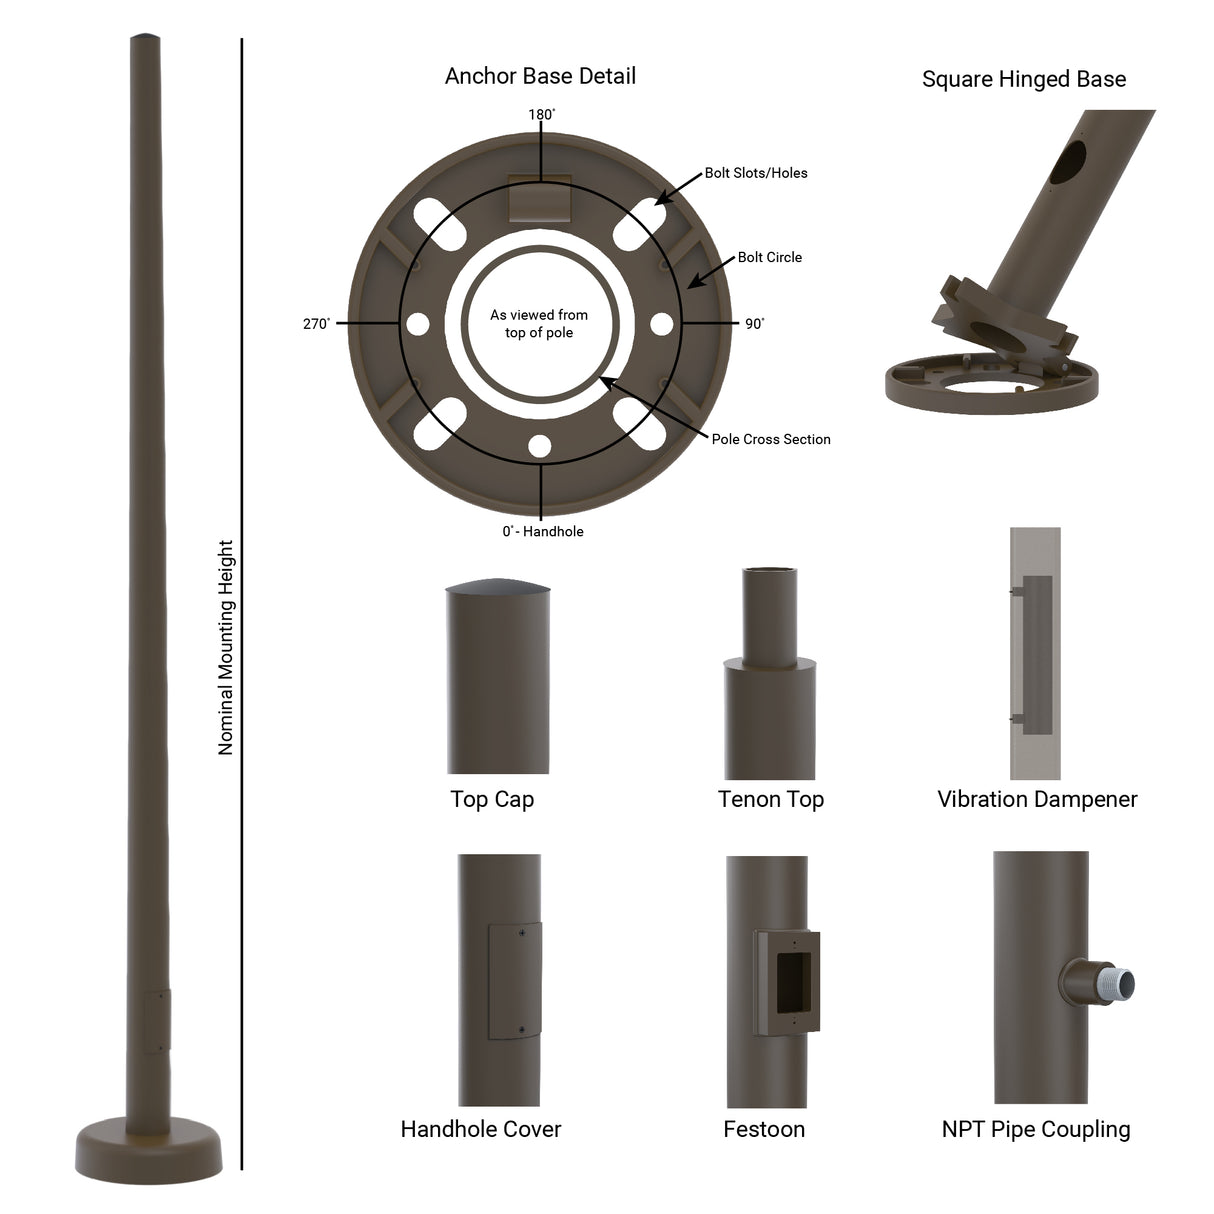 20' Tall x 6.0" Base OD x 4.0" Top OD x 0.188" Thick, Round Tapered Aluminum, Hinged Anchor Base Light Pole